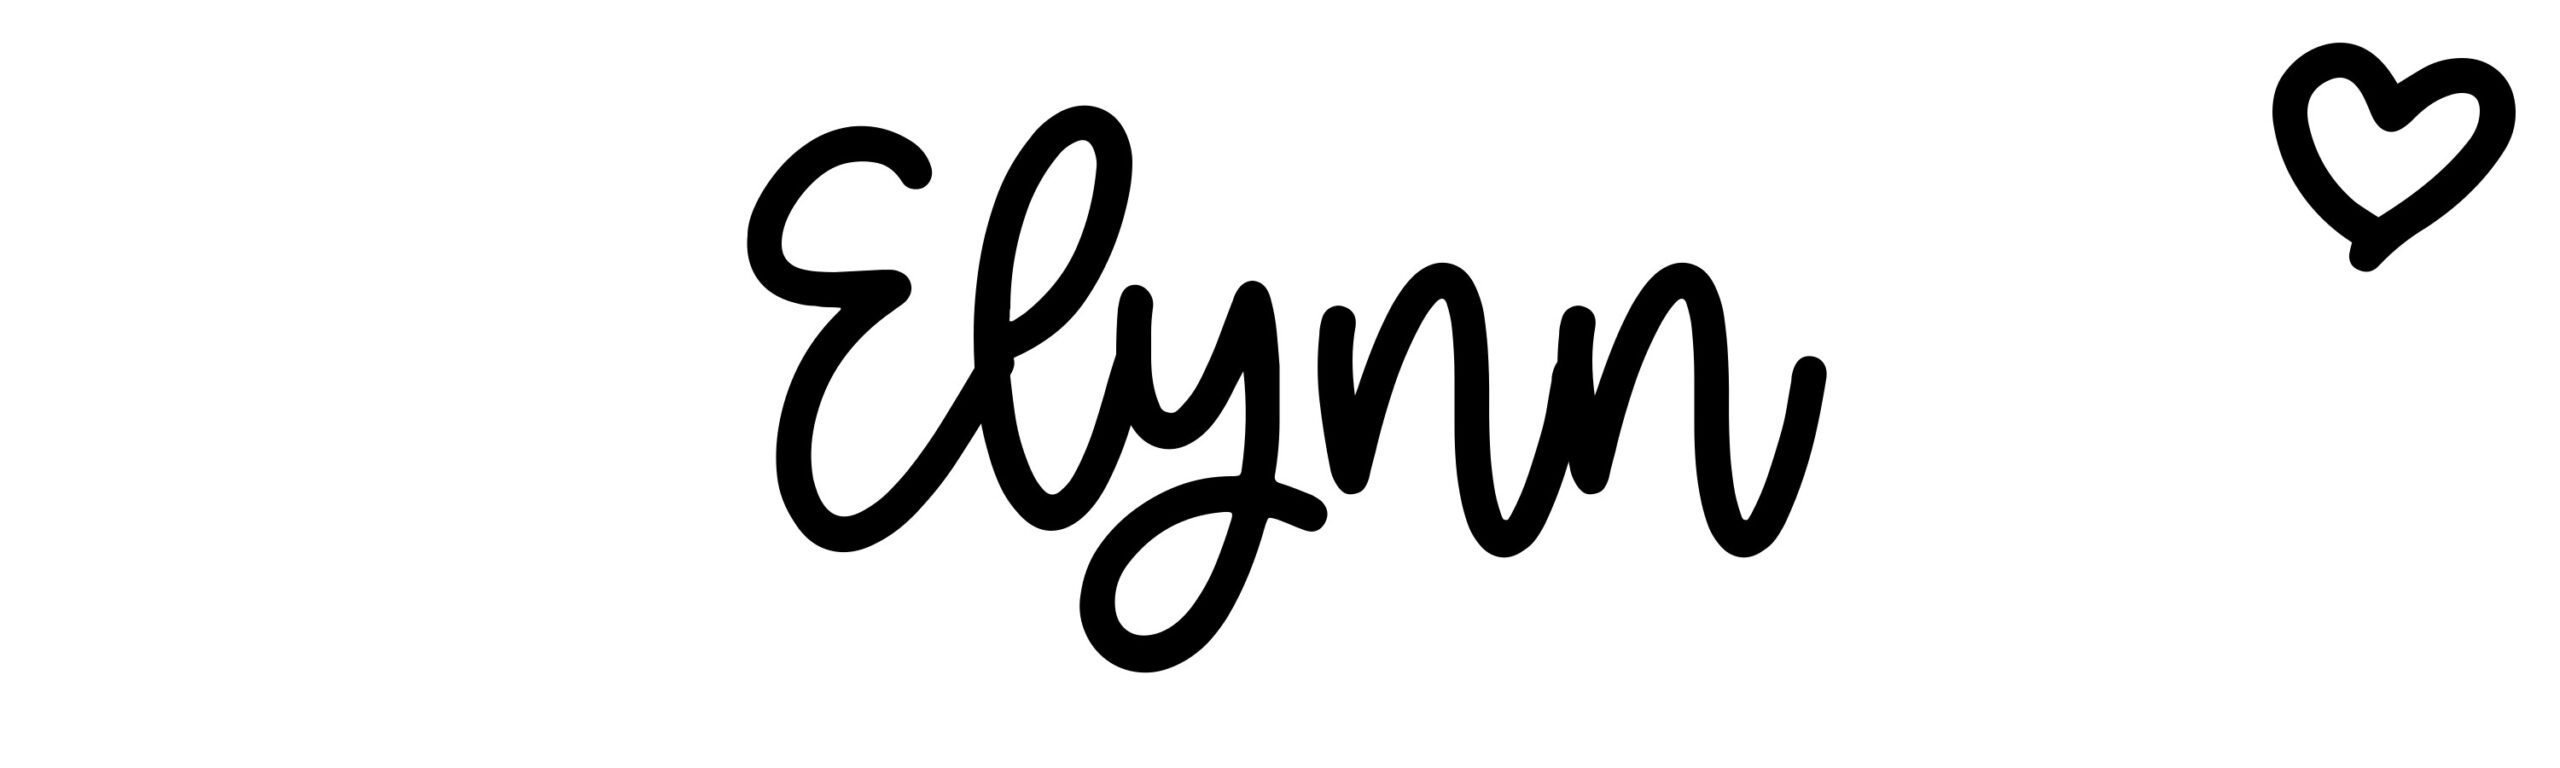 Elynn - Name meaning, origin, variations and more